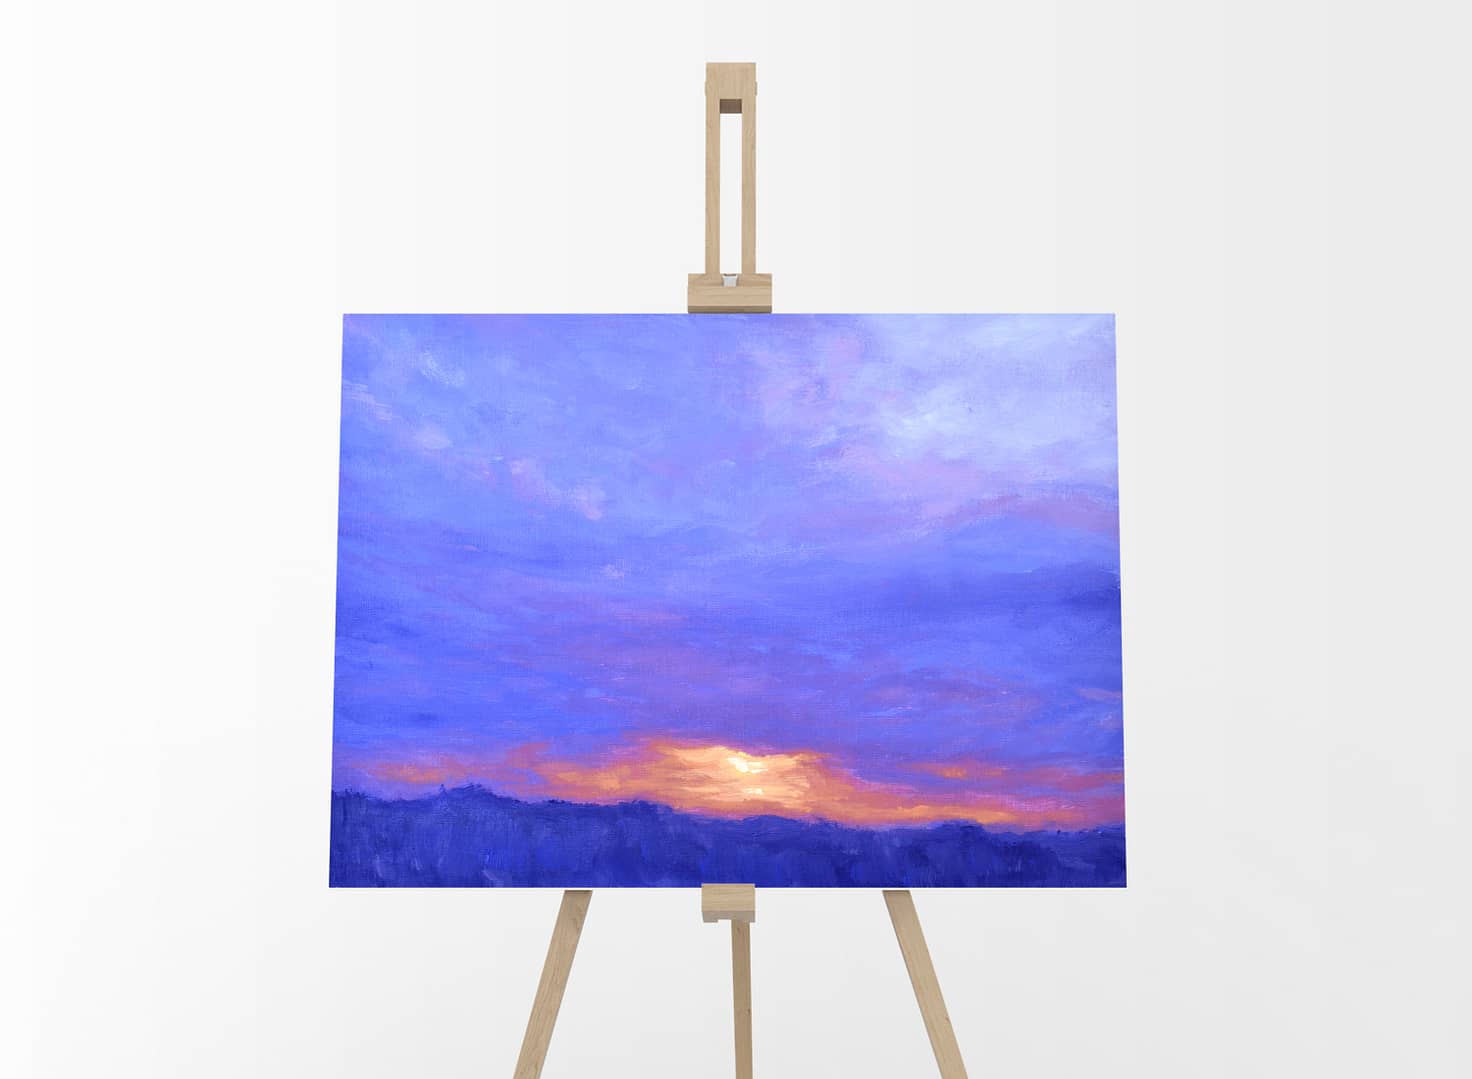 The Warmth Beneath Original Oil Painting by Andrew Gaia on easel